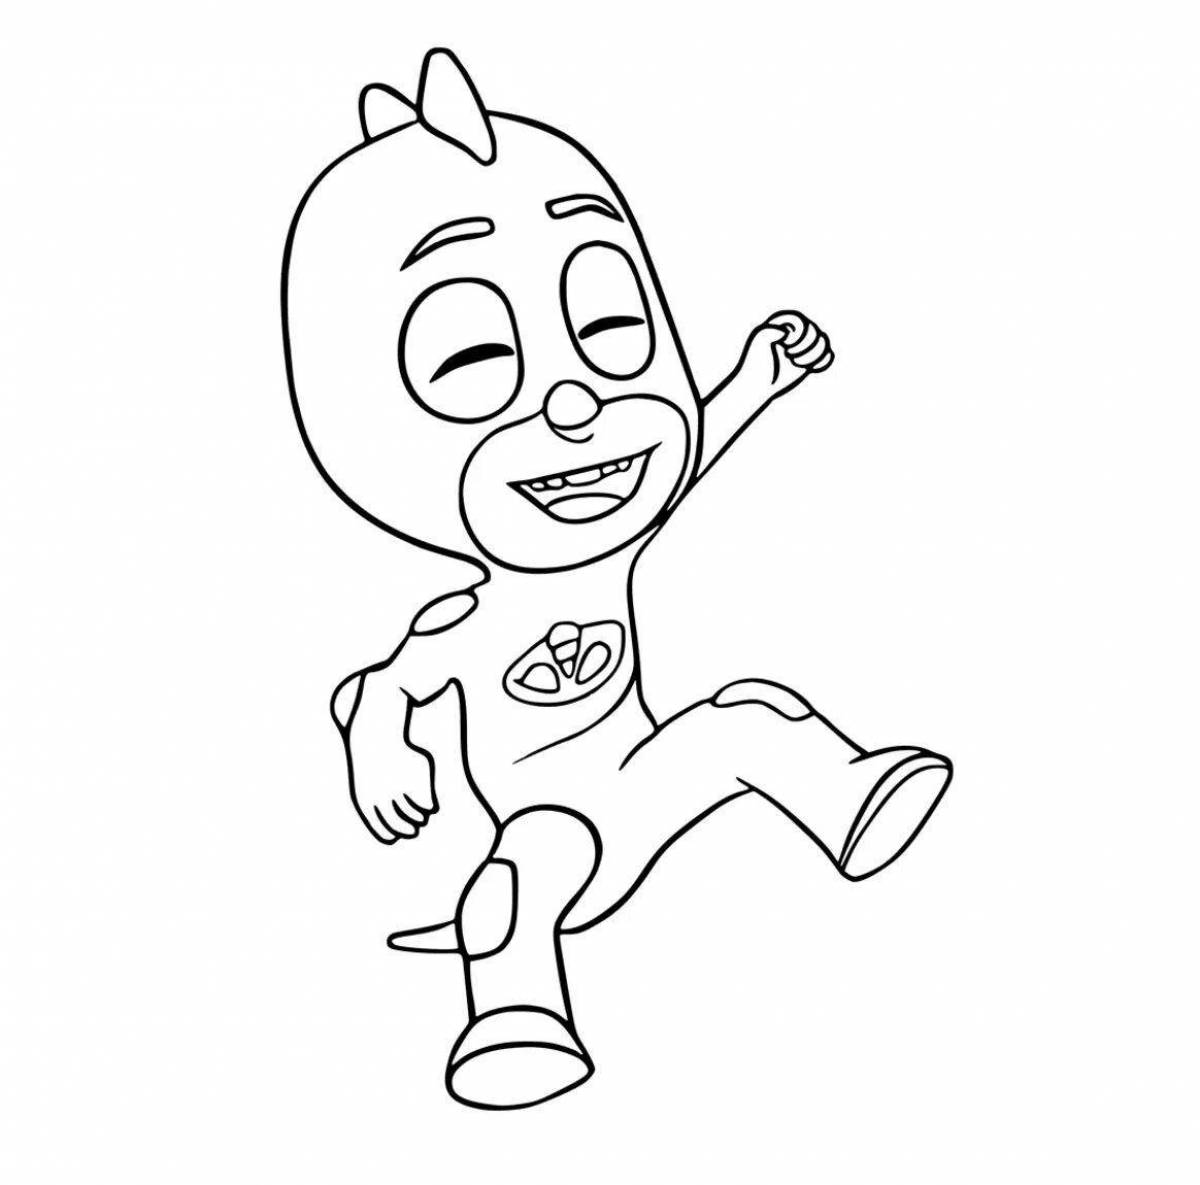 Coloring pages masked heroes